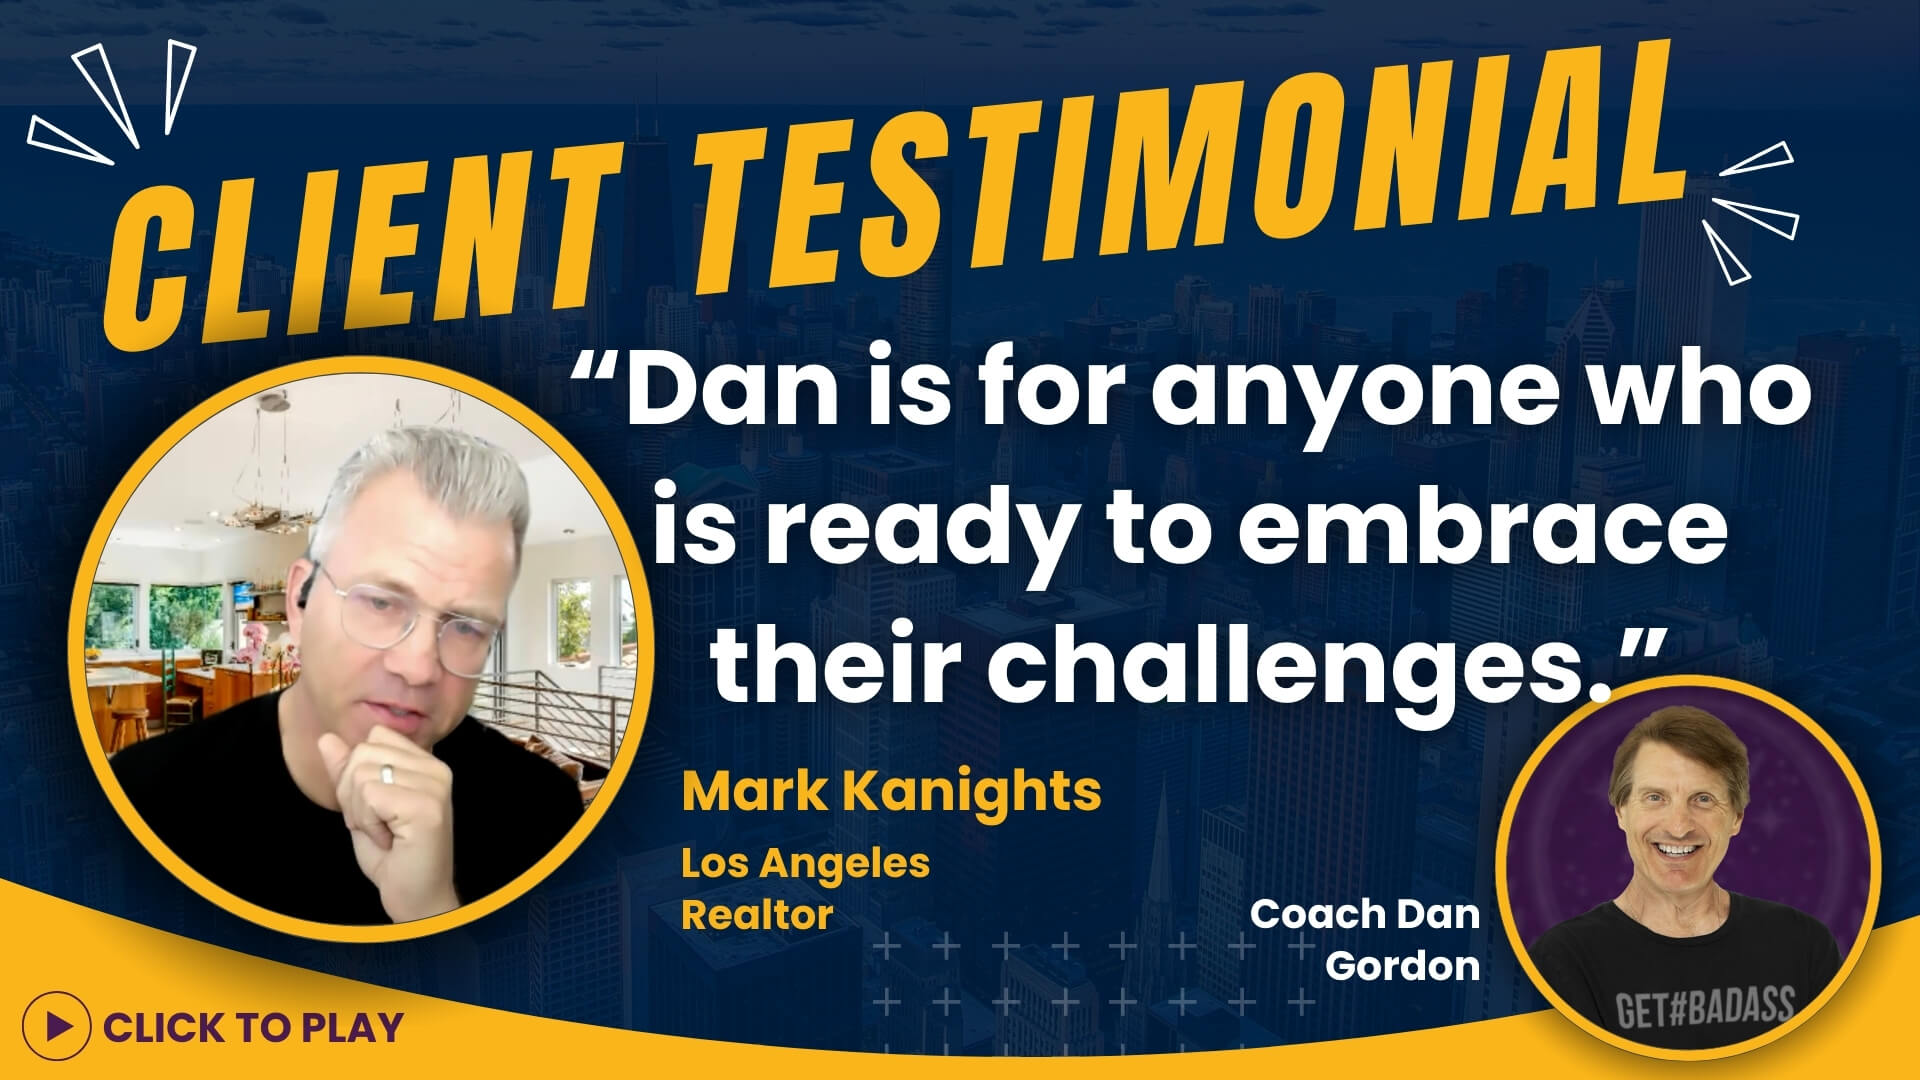 Realtor Mark Kanights recommends Coach Dan Gordon in a testimonial video, illustrated with their cheerful portraits and a quote about readiness to embrace challenges.